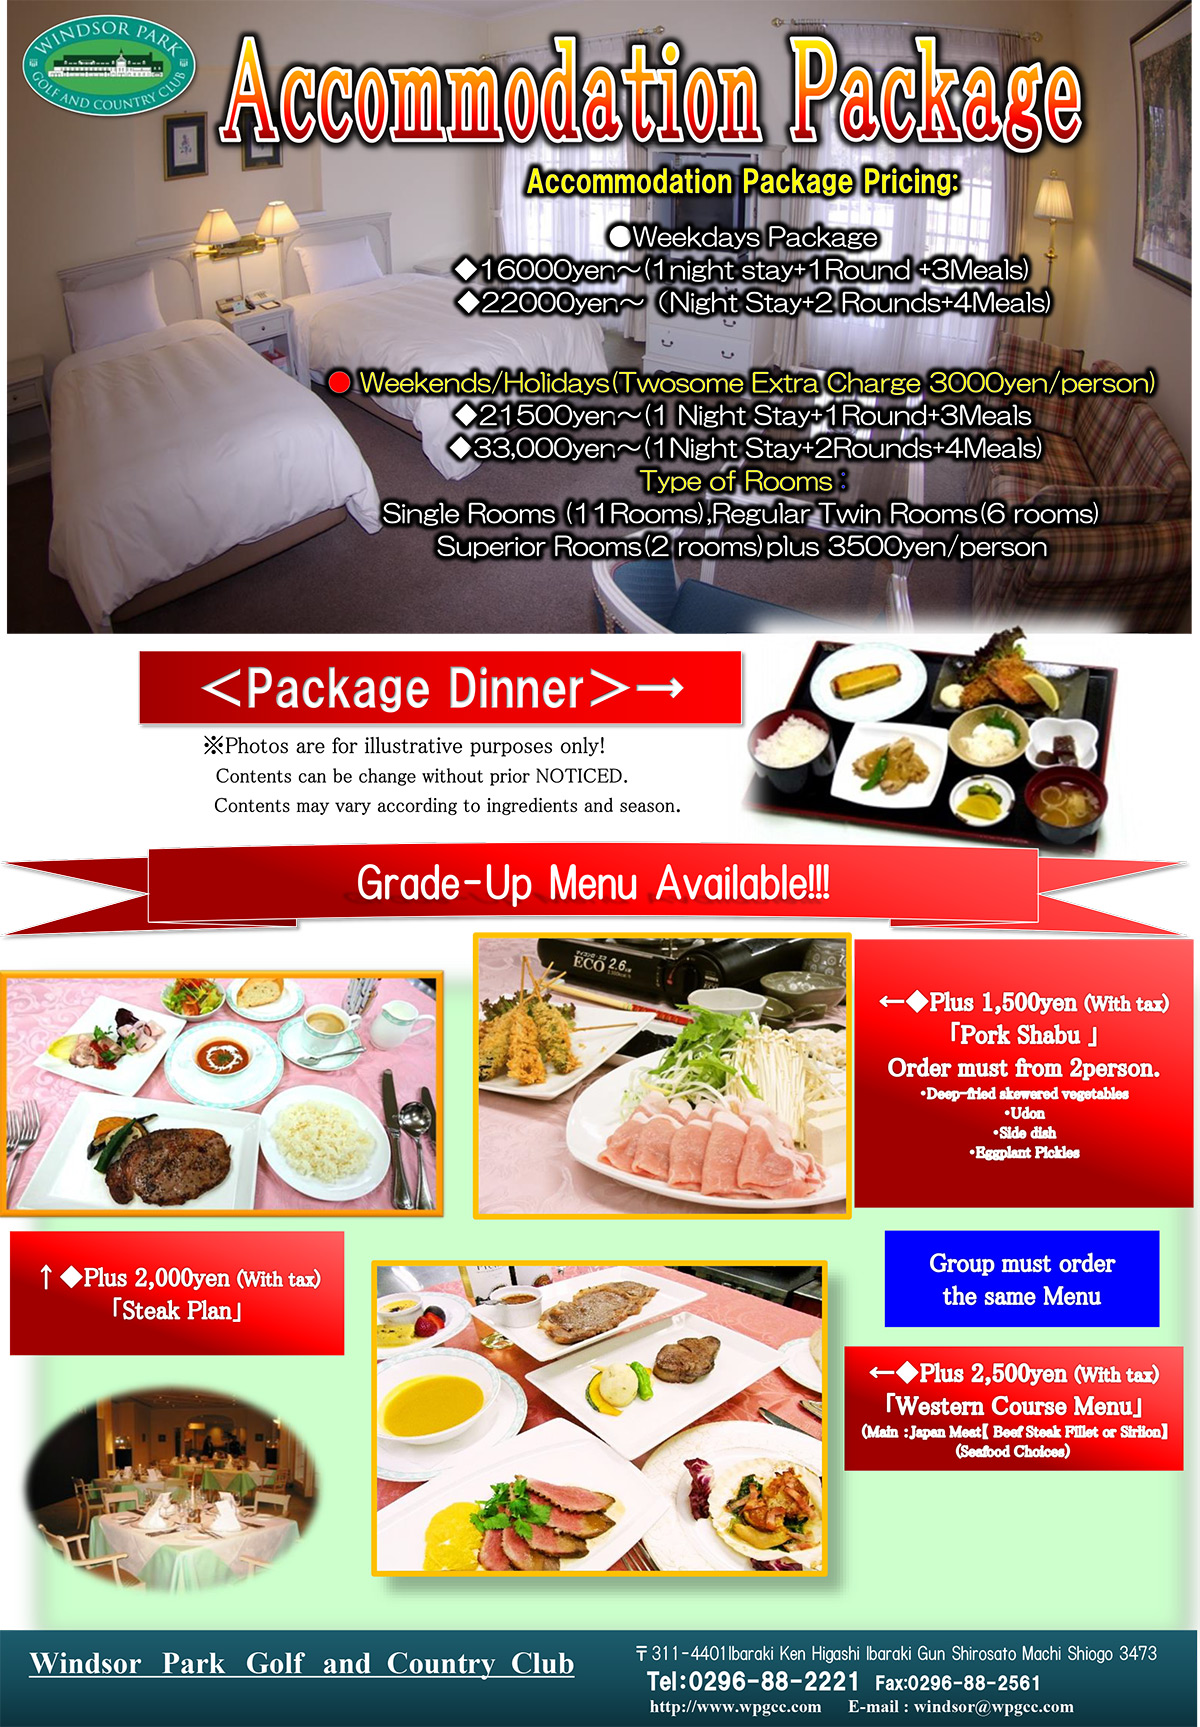  Affordable Accommodation Package